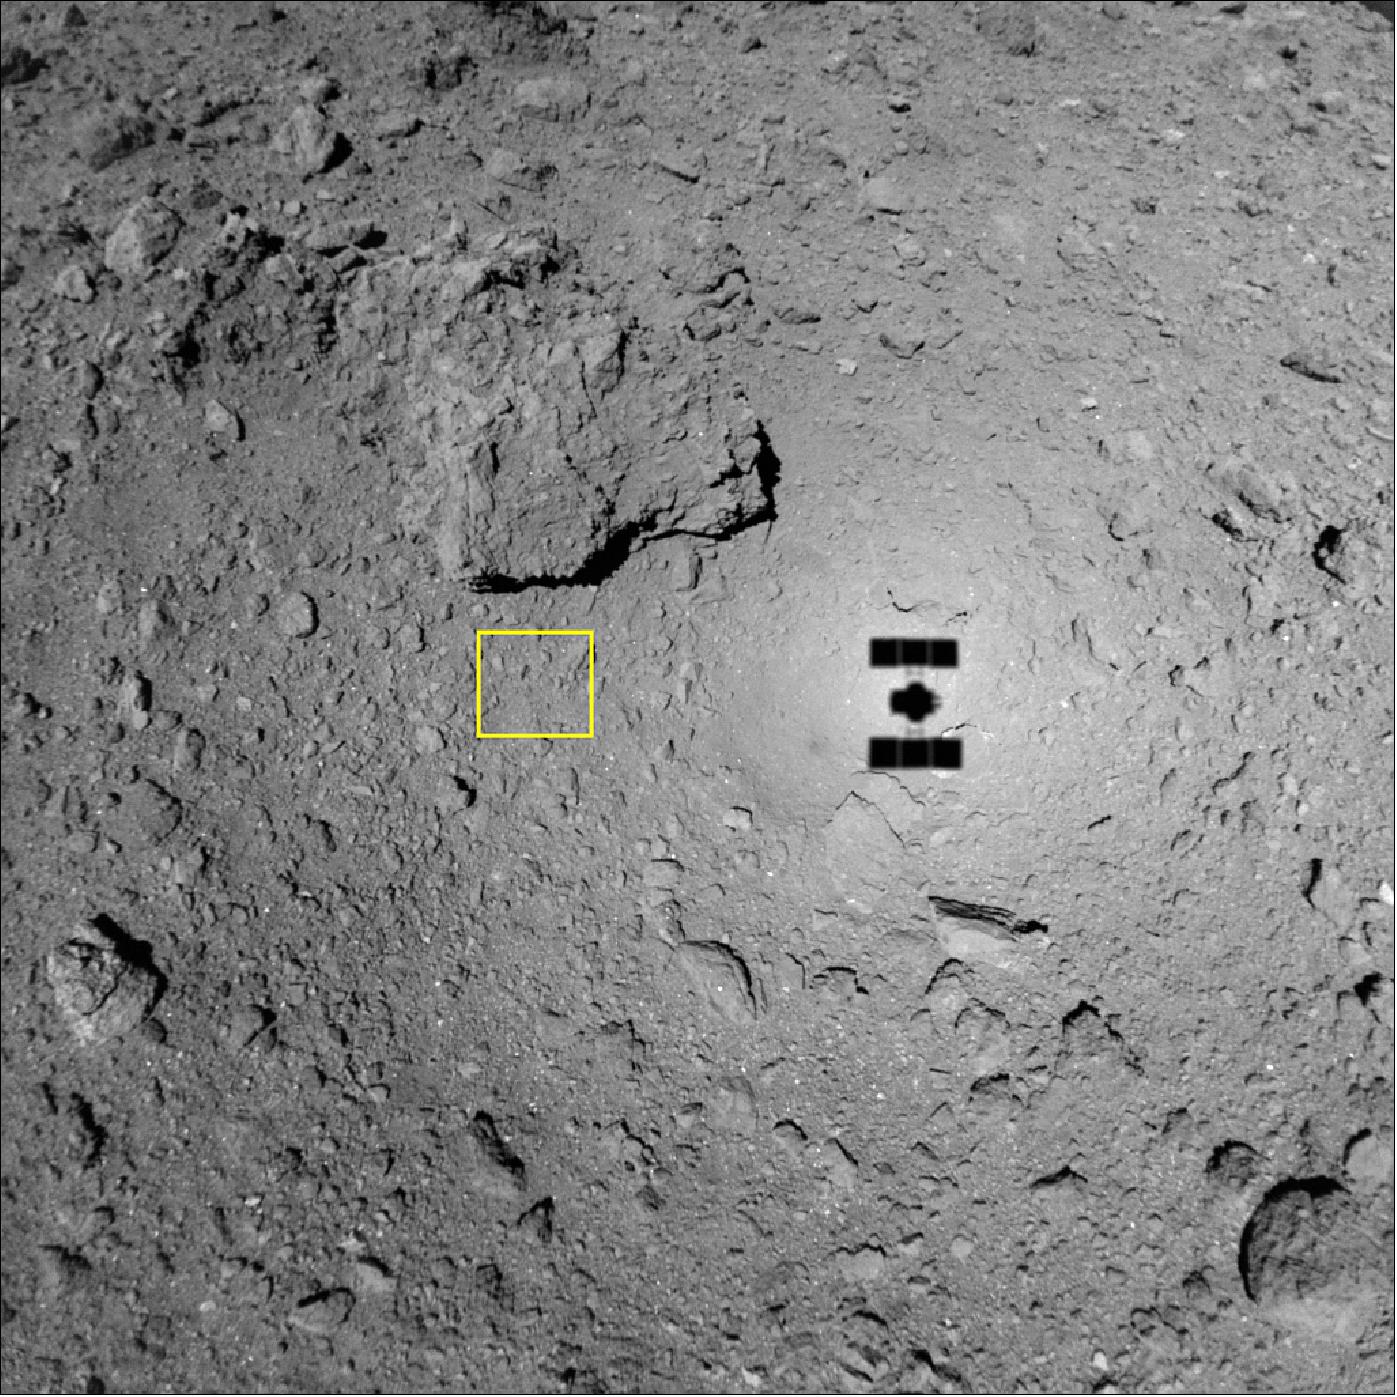 Figure 75: Surface of Ryugu photographed by the ONC-W1 at an altitude of about 49m. The image was captured on October 15, 2018 at 22:39 JST. The yellow square indicates the image area in Figure 74 (image credit: JAXA, University of Tokyo, Kochi University, Rikkyo University, Nagoya University, Chiba Institute of Technology, Meiji University, University of Aizu, AIST)